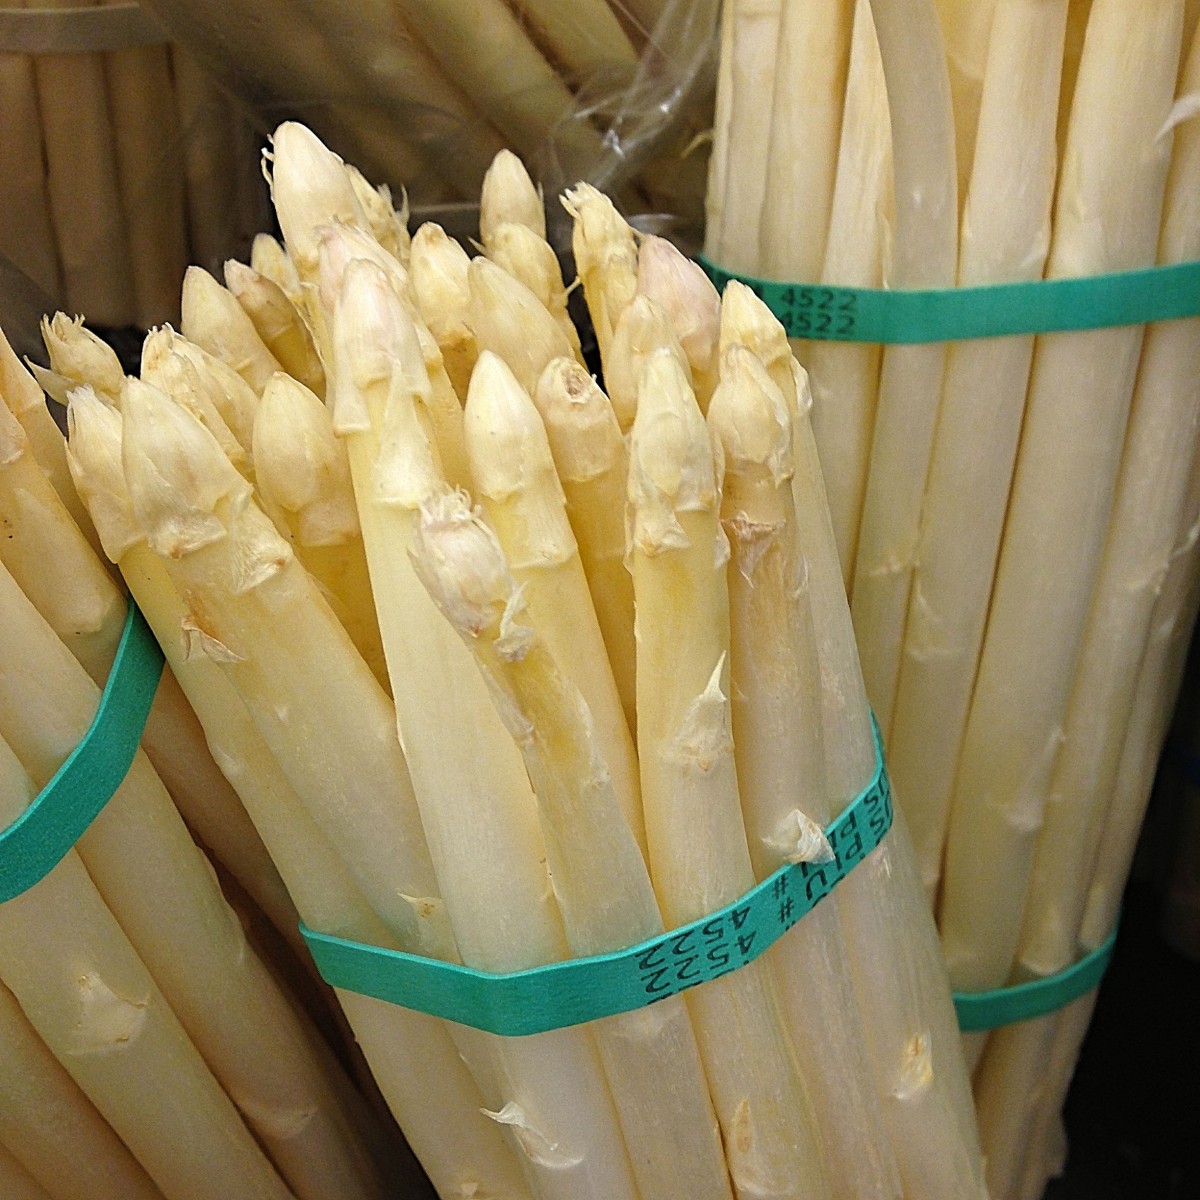 White asparagus that has been cooked with a little butter pairs nicely with mashed potatoes.